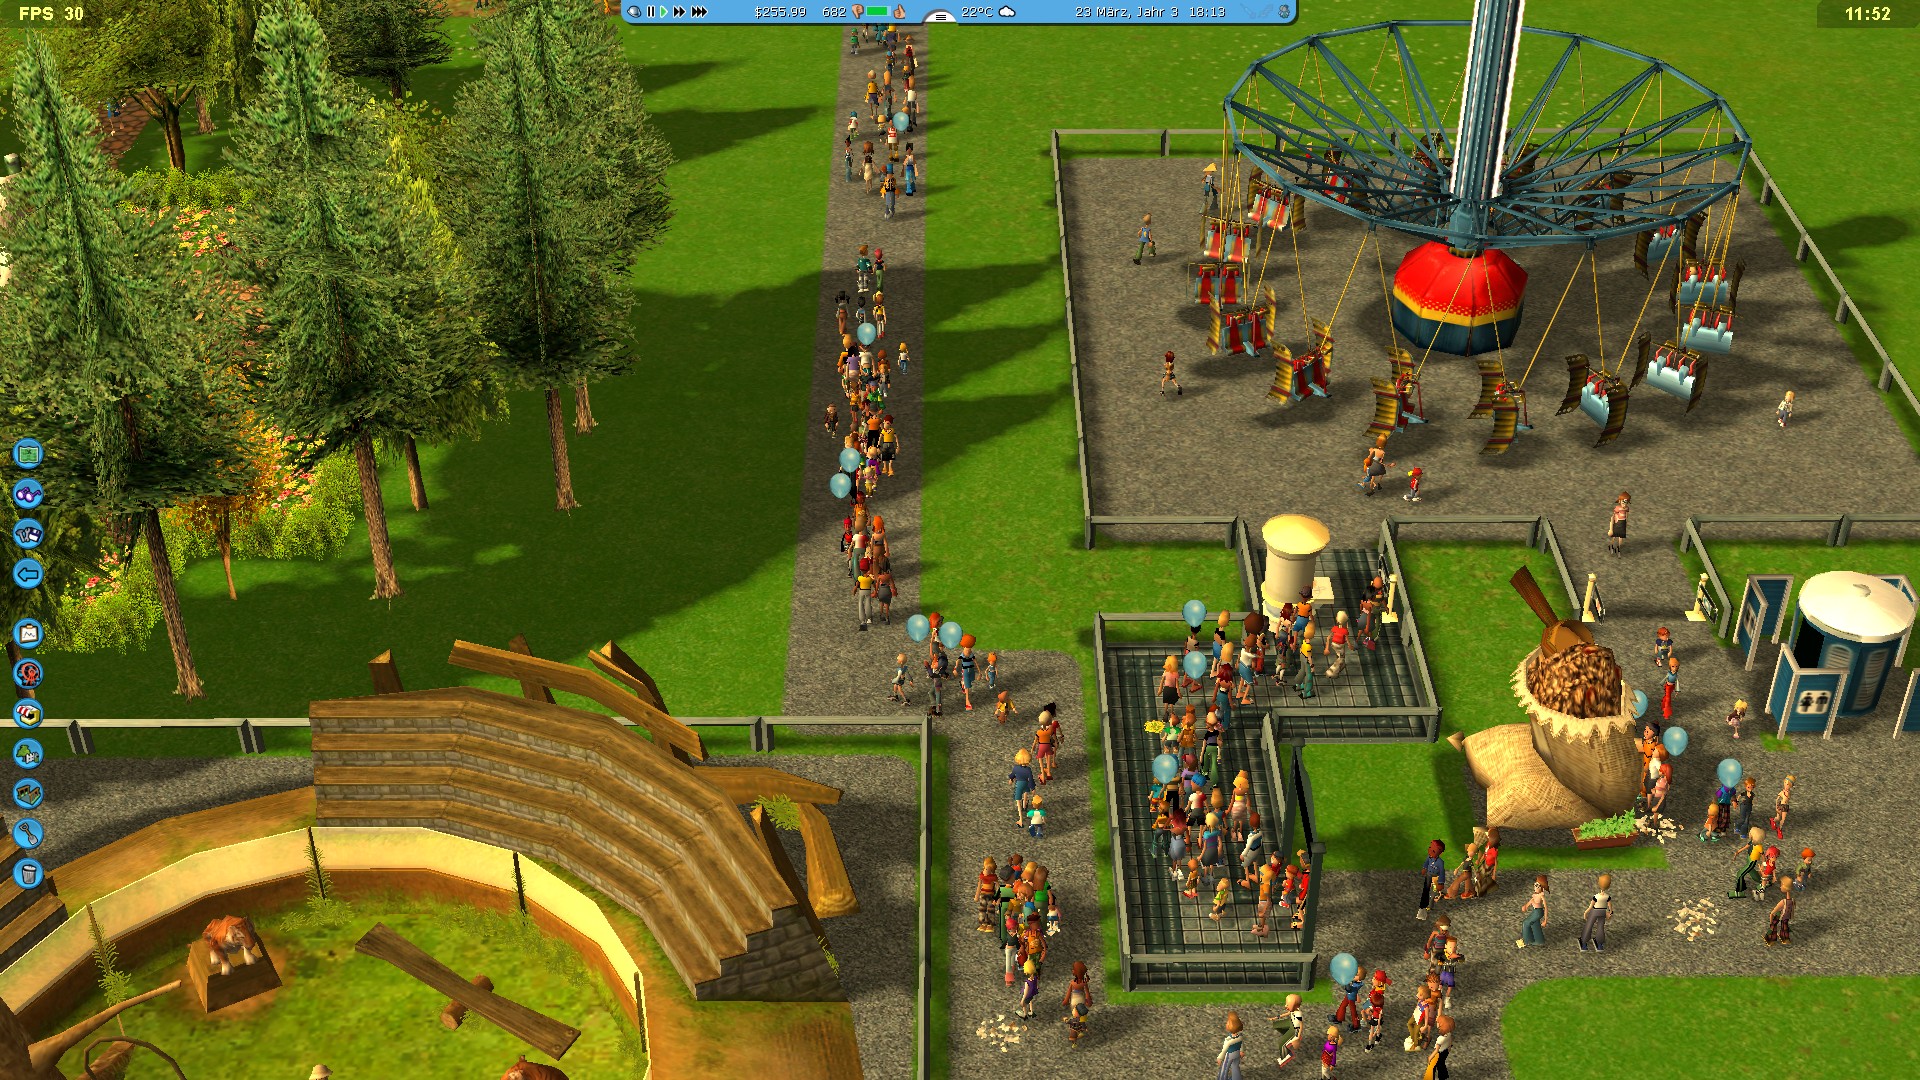 Roller Coaster Tycoon 3 Free Download Full Version For Windows 8